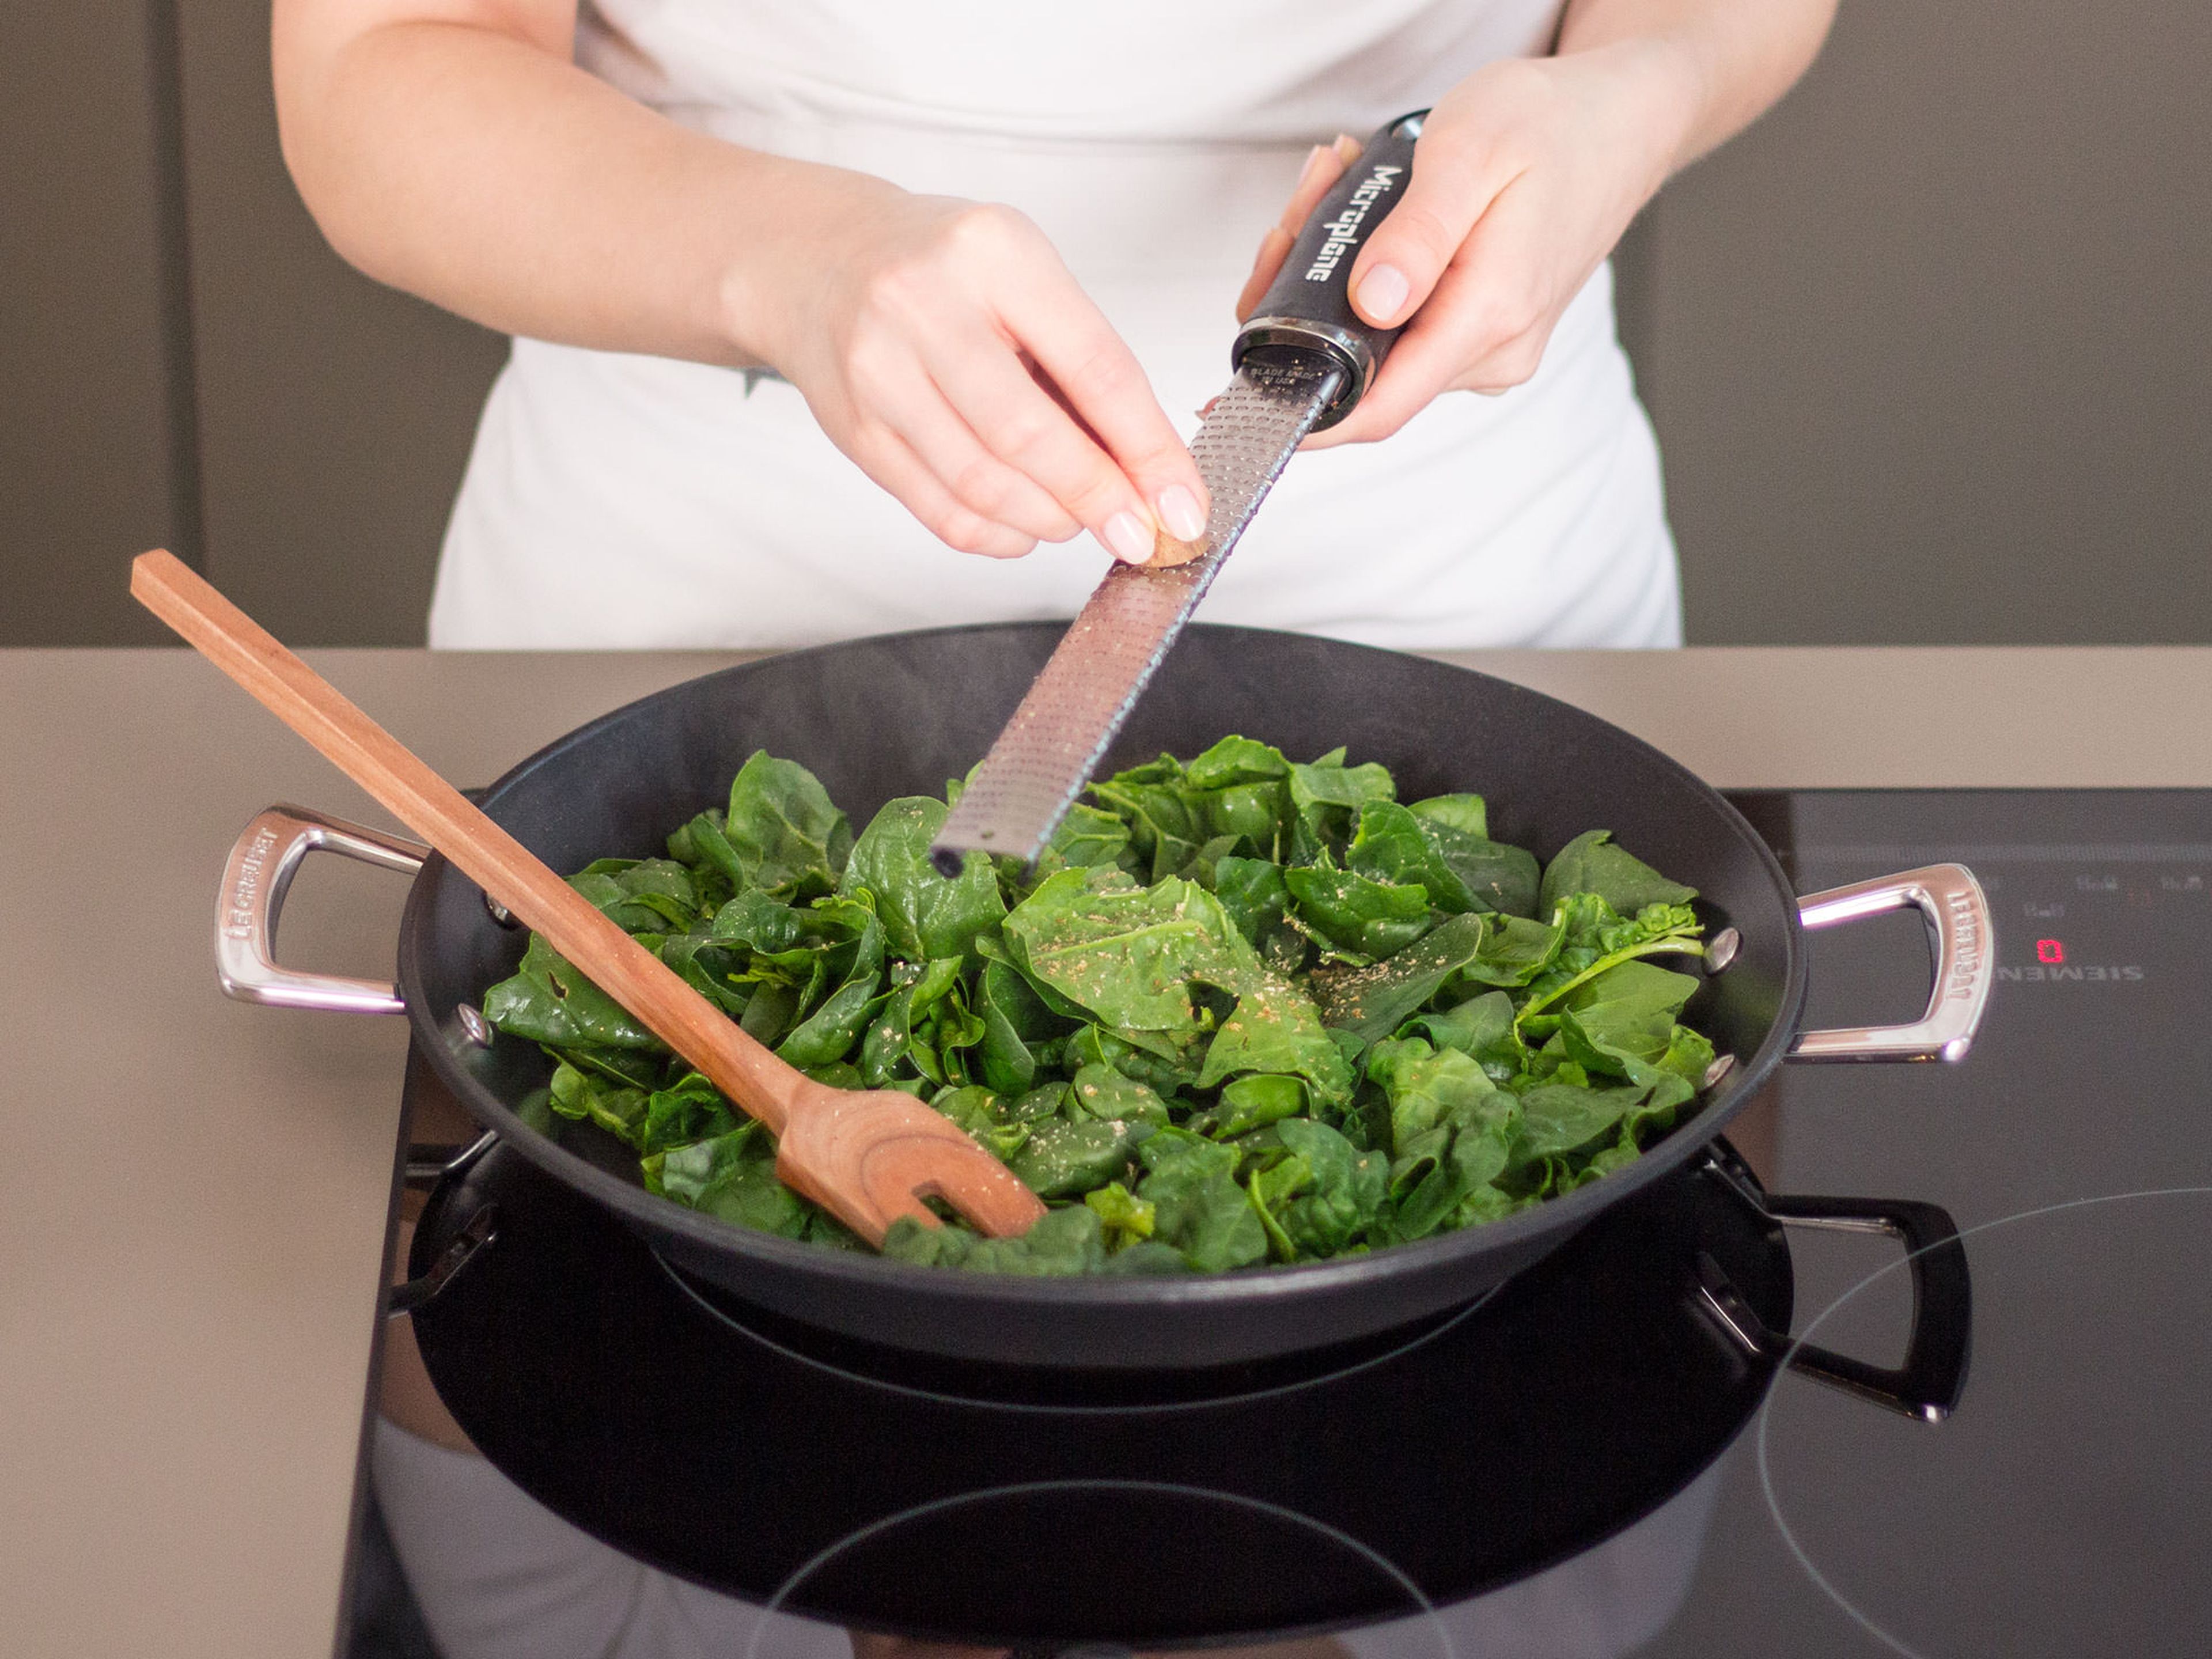 In a frying pan, sauté the spinach until wilted. Season to taste with nutmeg, salt, and pepper. Set aside.